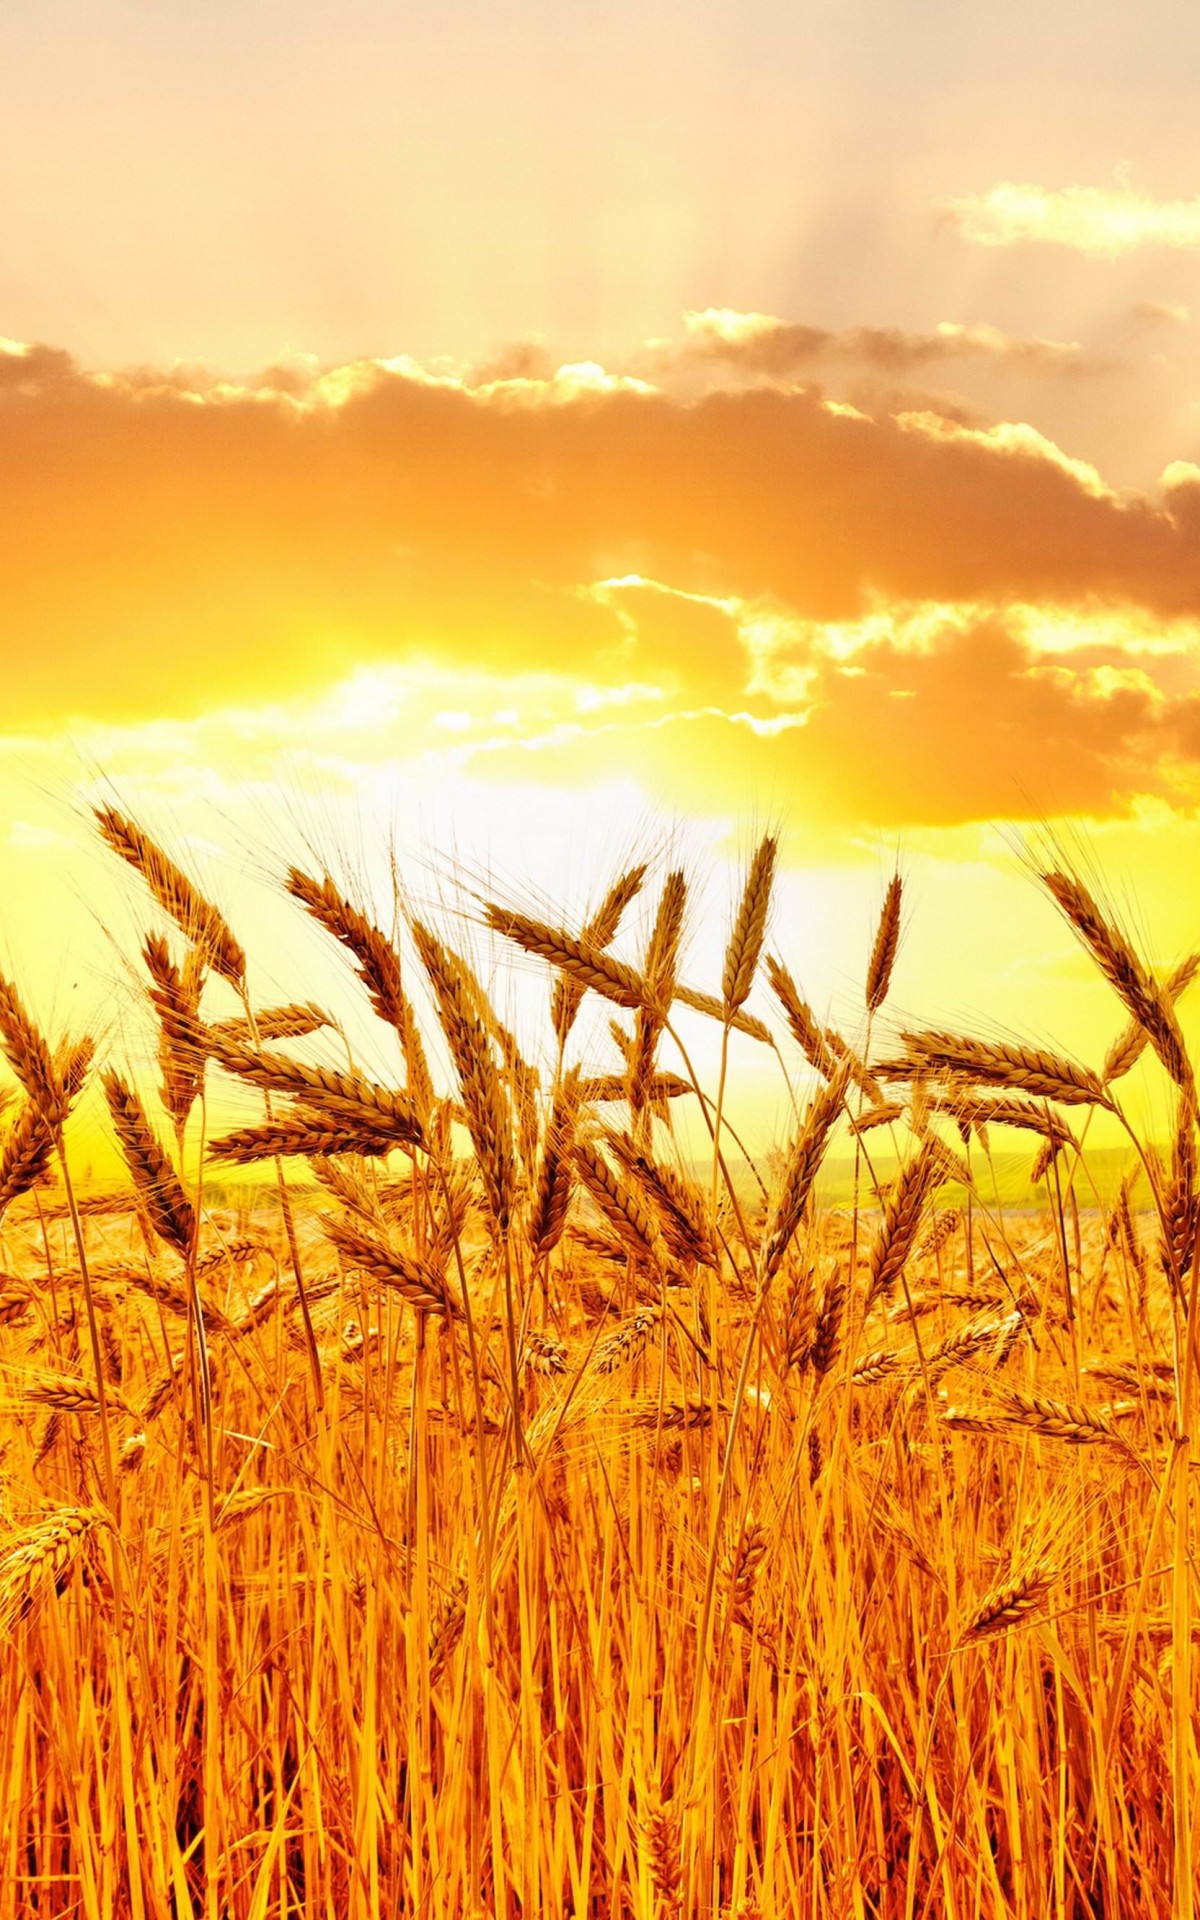 Golden Wheat Field At Sunset Wallpaper for Amazon Kindle Fire HDX